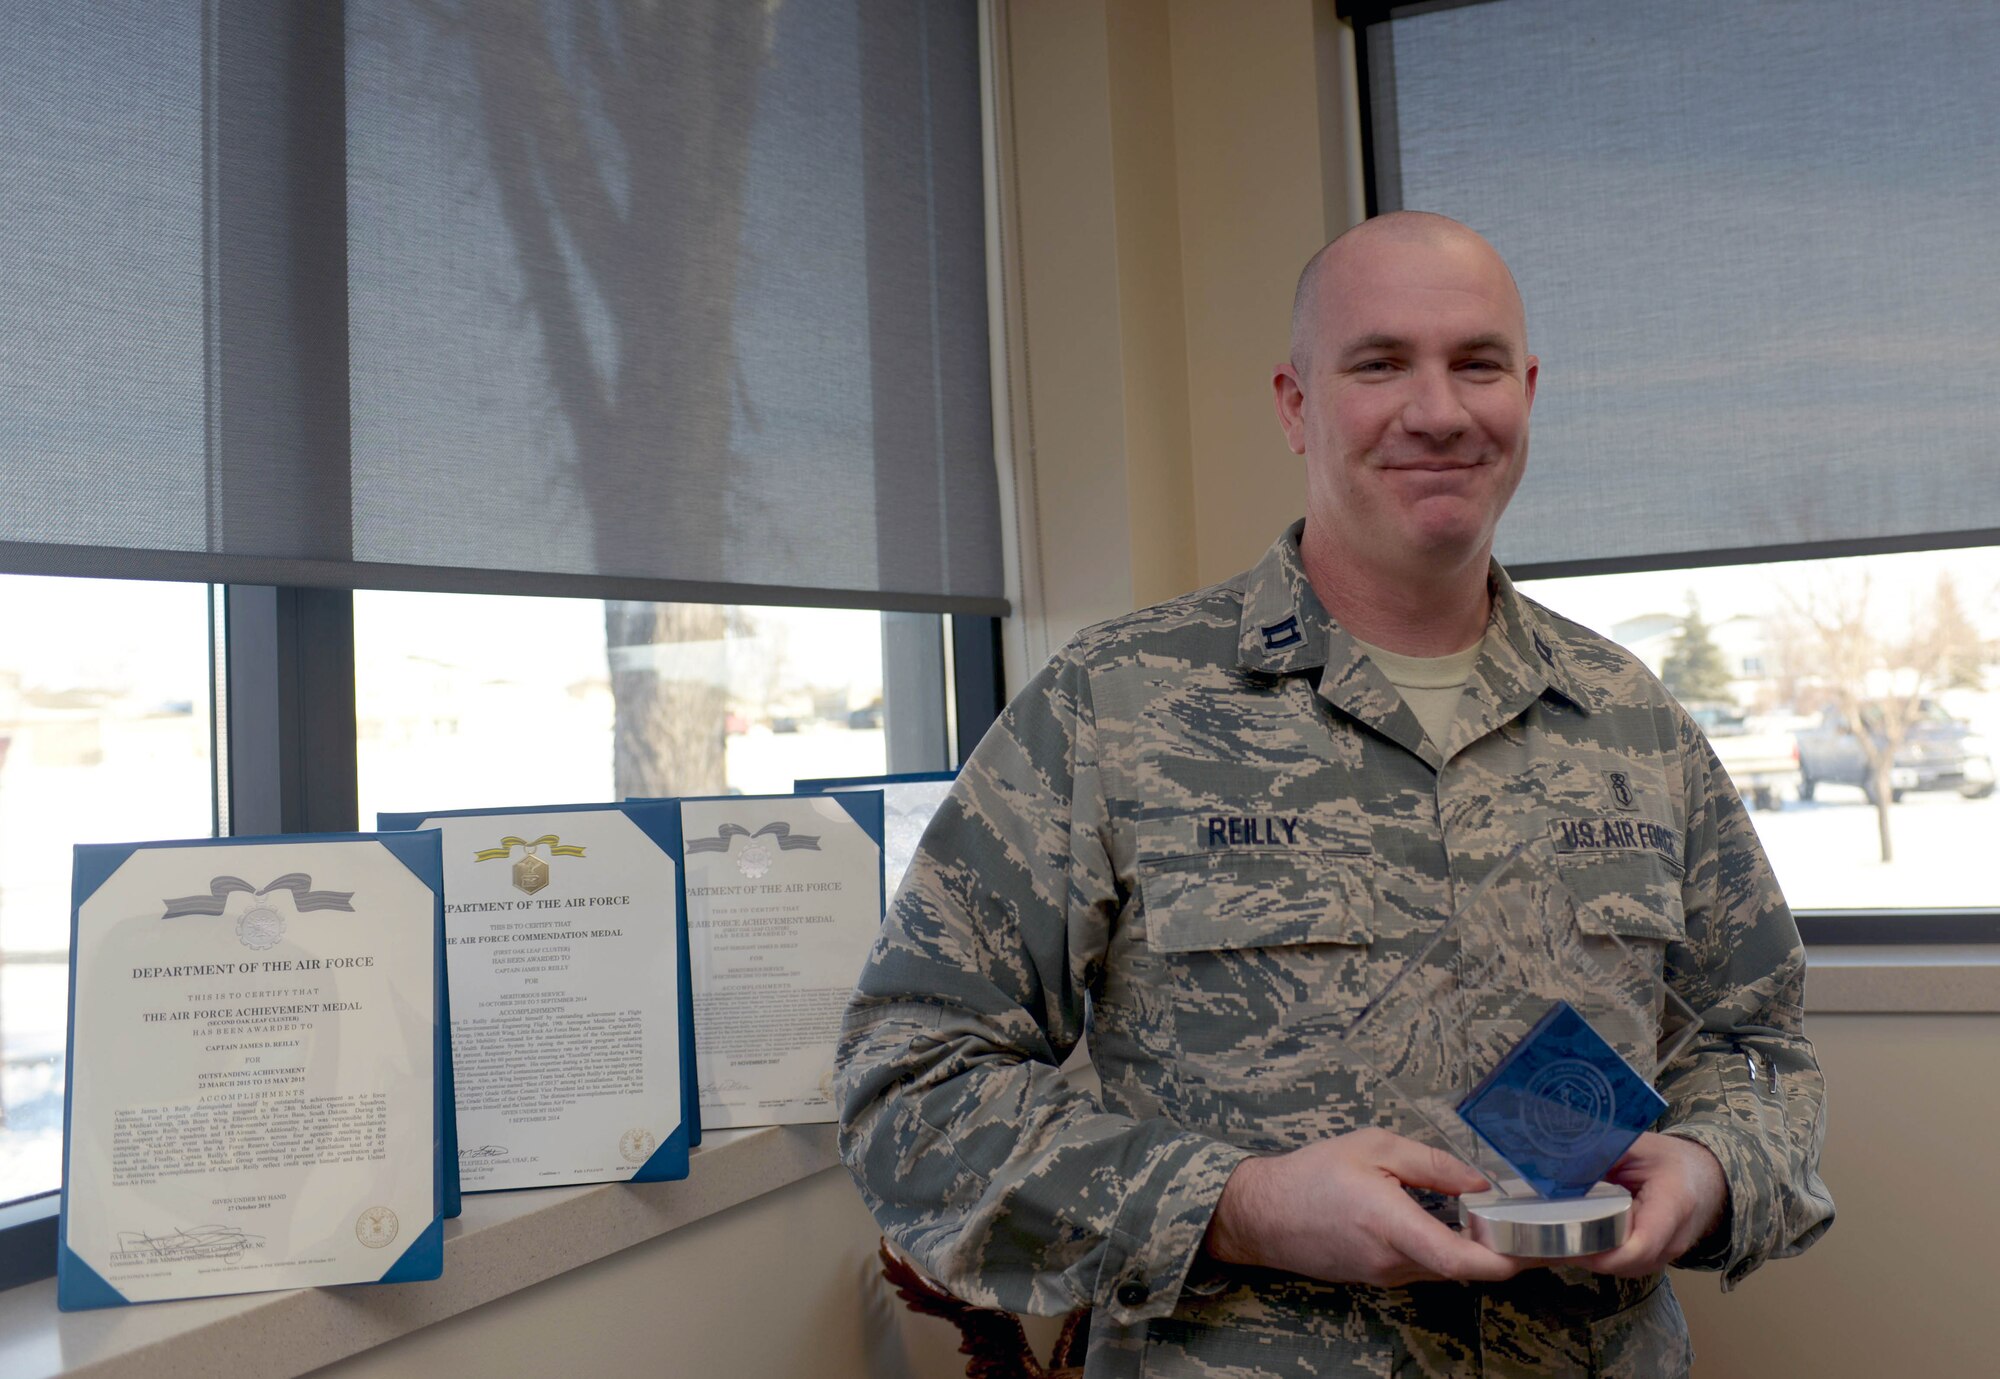 Capt. James Reilly, the bioenvironmental engineering flight commander assigned to the 28th Medical Group, holds the Military Health Leadership Excellence award for junior non-providers at Ellsworth Air Force Base, S.D., Jan. 26, 2017. The MHLE award is an annual award given to those who display great innovation in the medical field and is presented to the top junior providers and non-providers from each branch of the Department of Defense. (U.S. Air Force photo by Airman 1st Class Donald C. Knechtel)